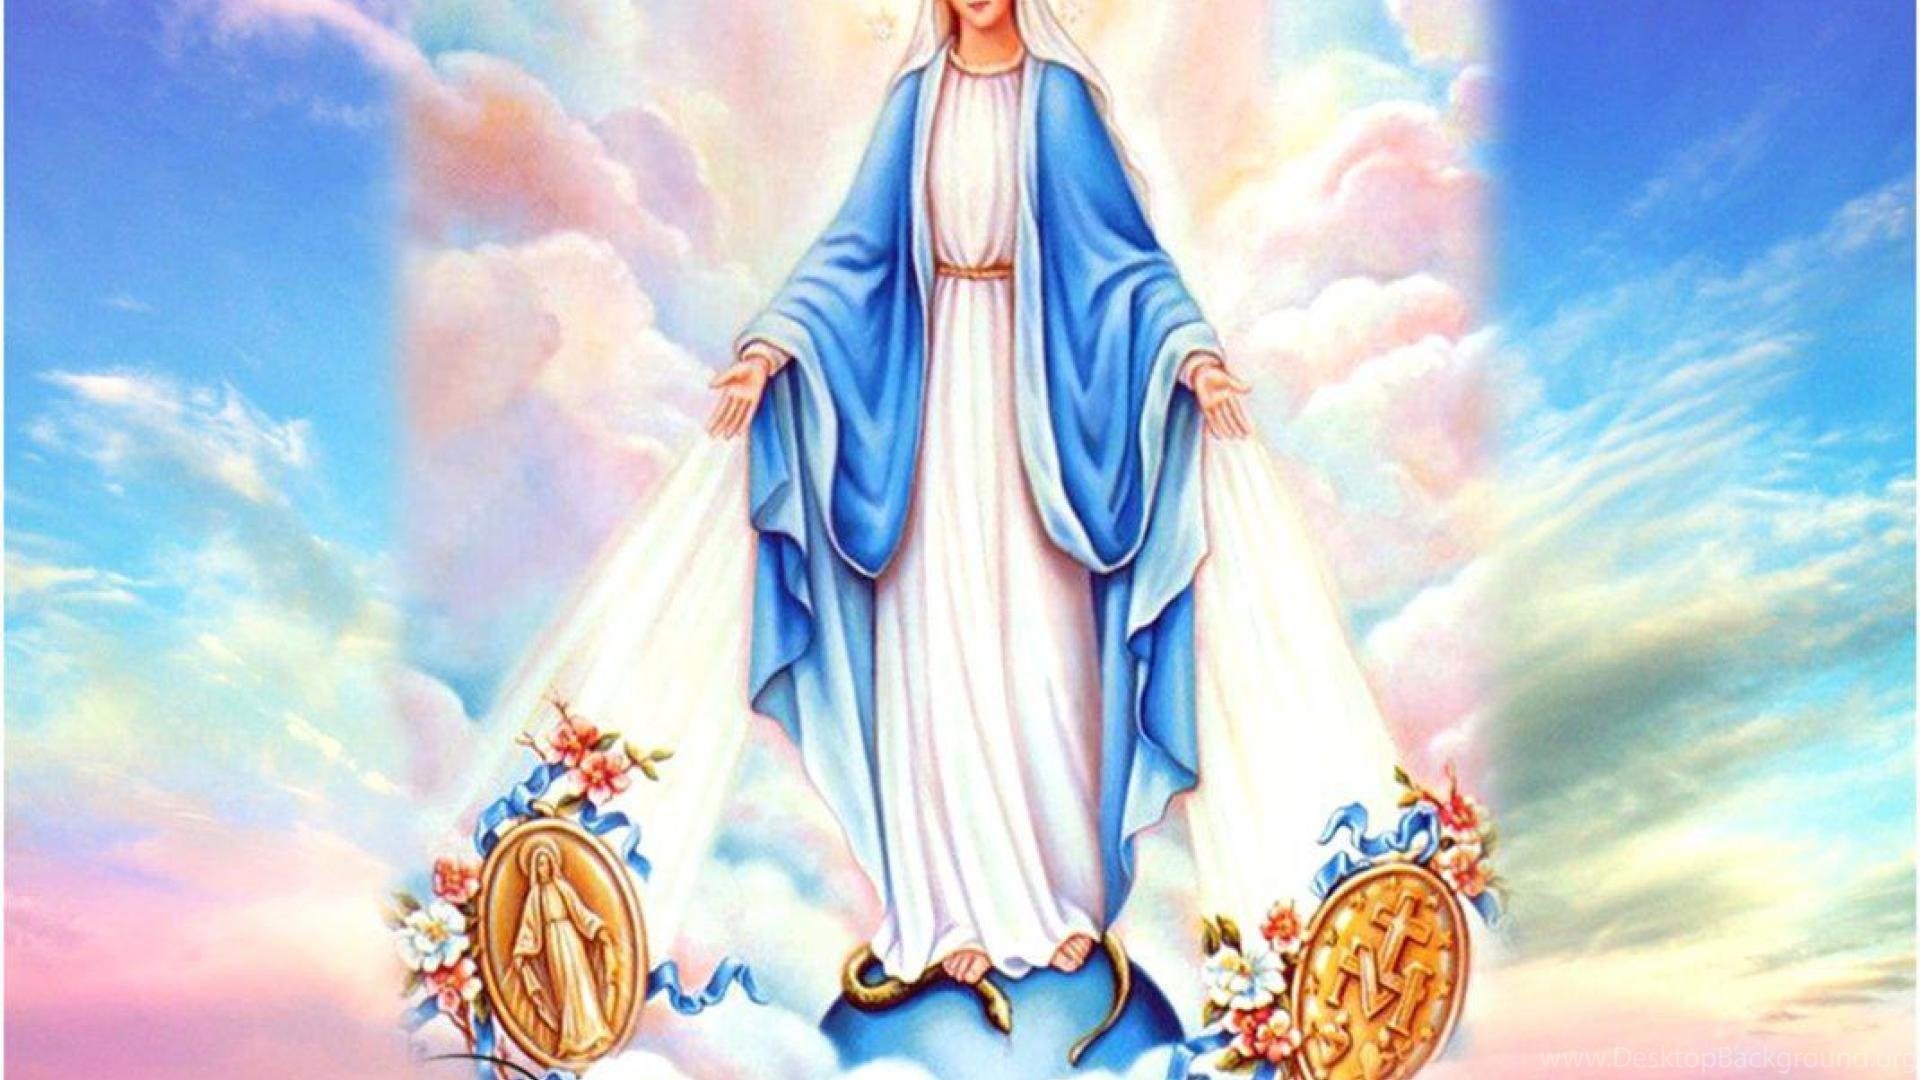 1920x1080, Virgin Mary Wallpaper - Original Our Lady Of Miraculous Medal -  1920x1080 Wallpaper 